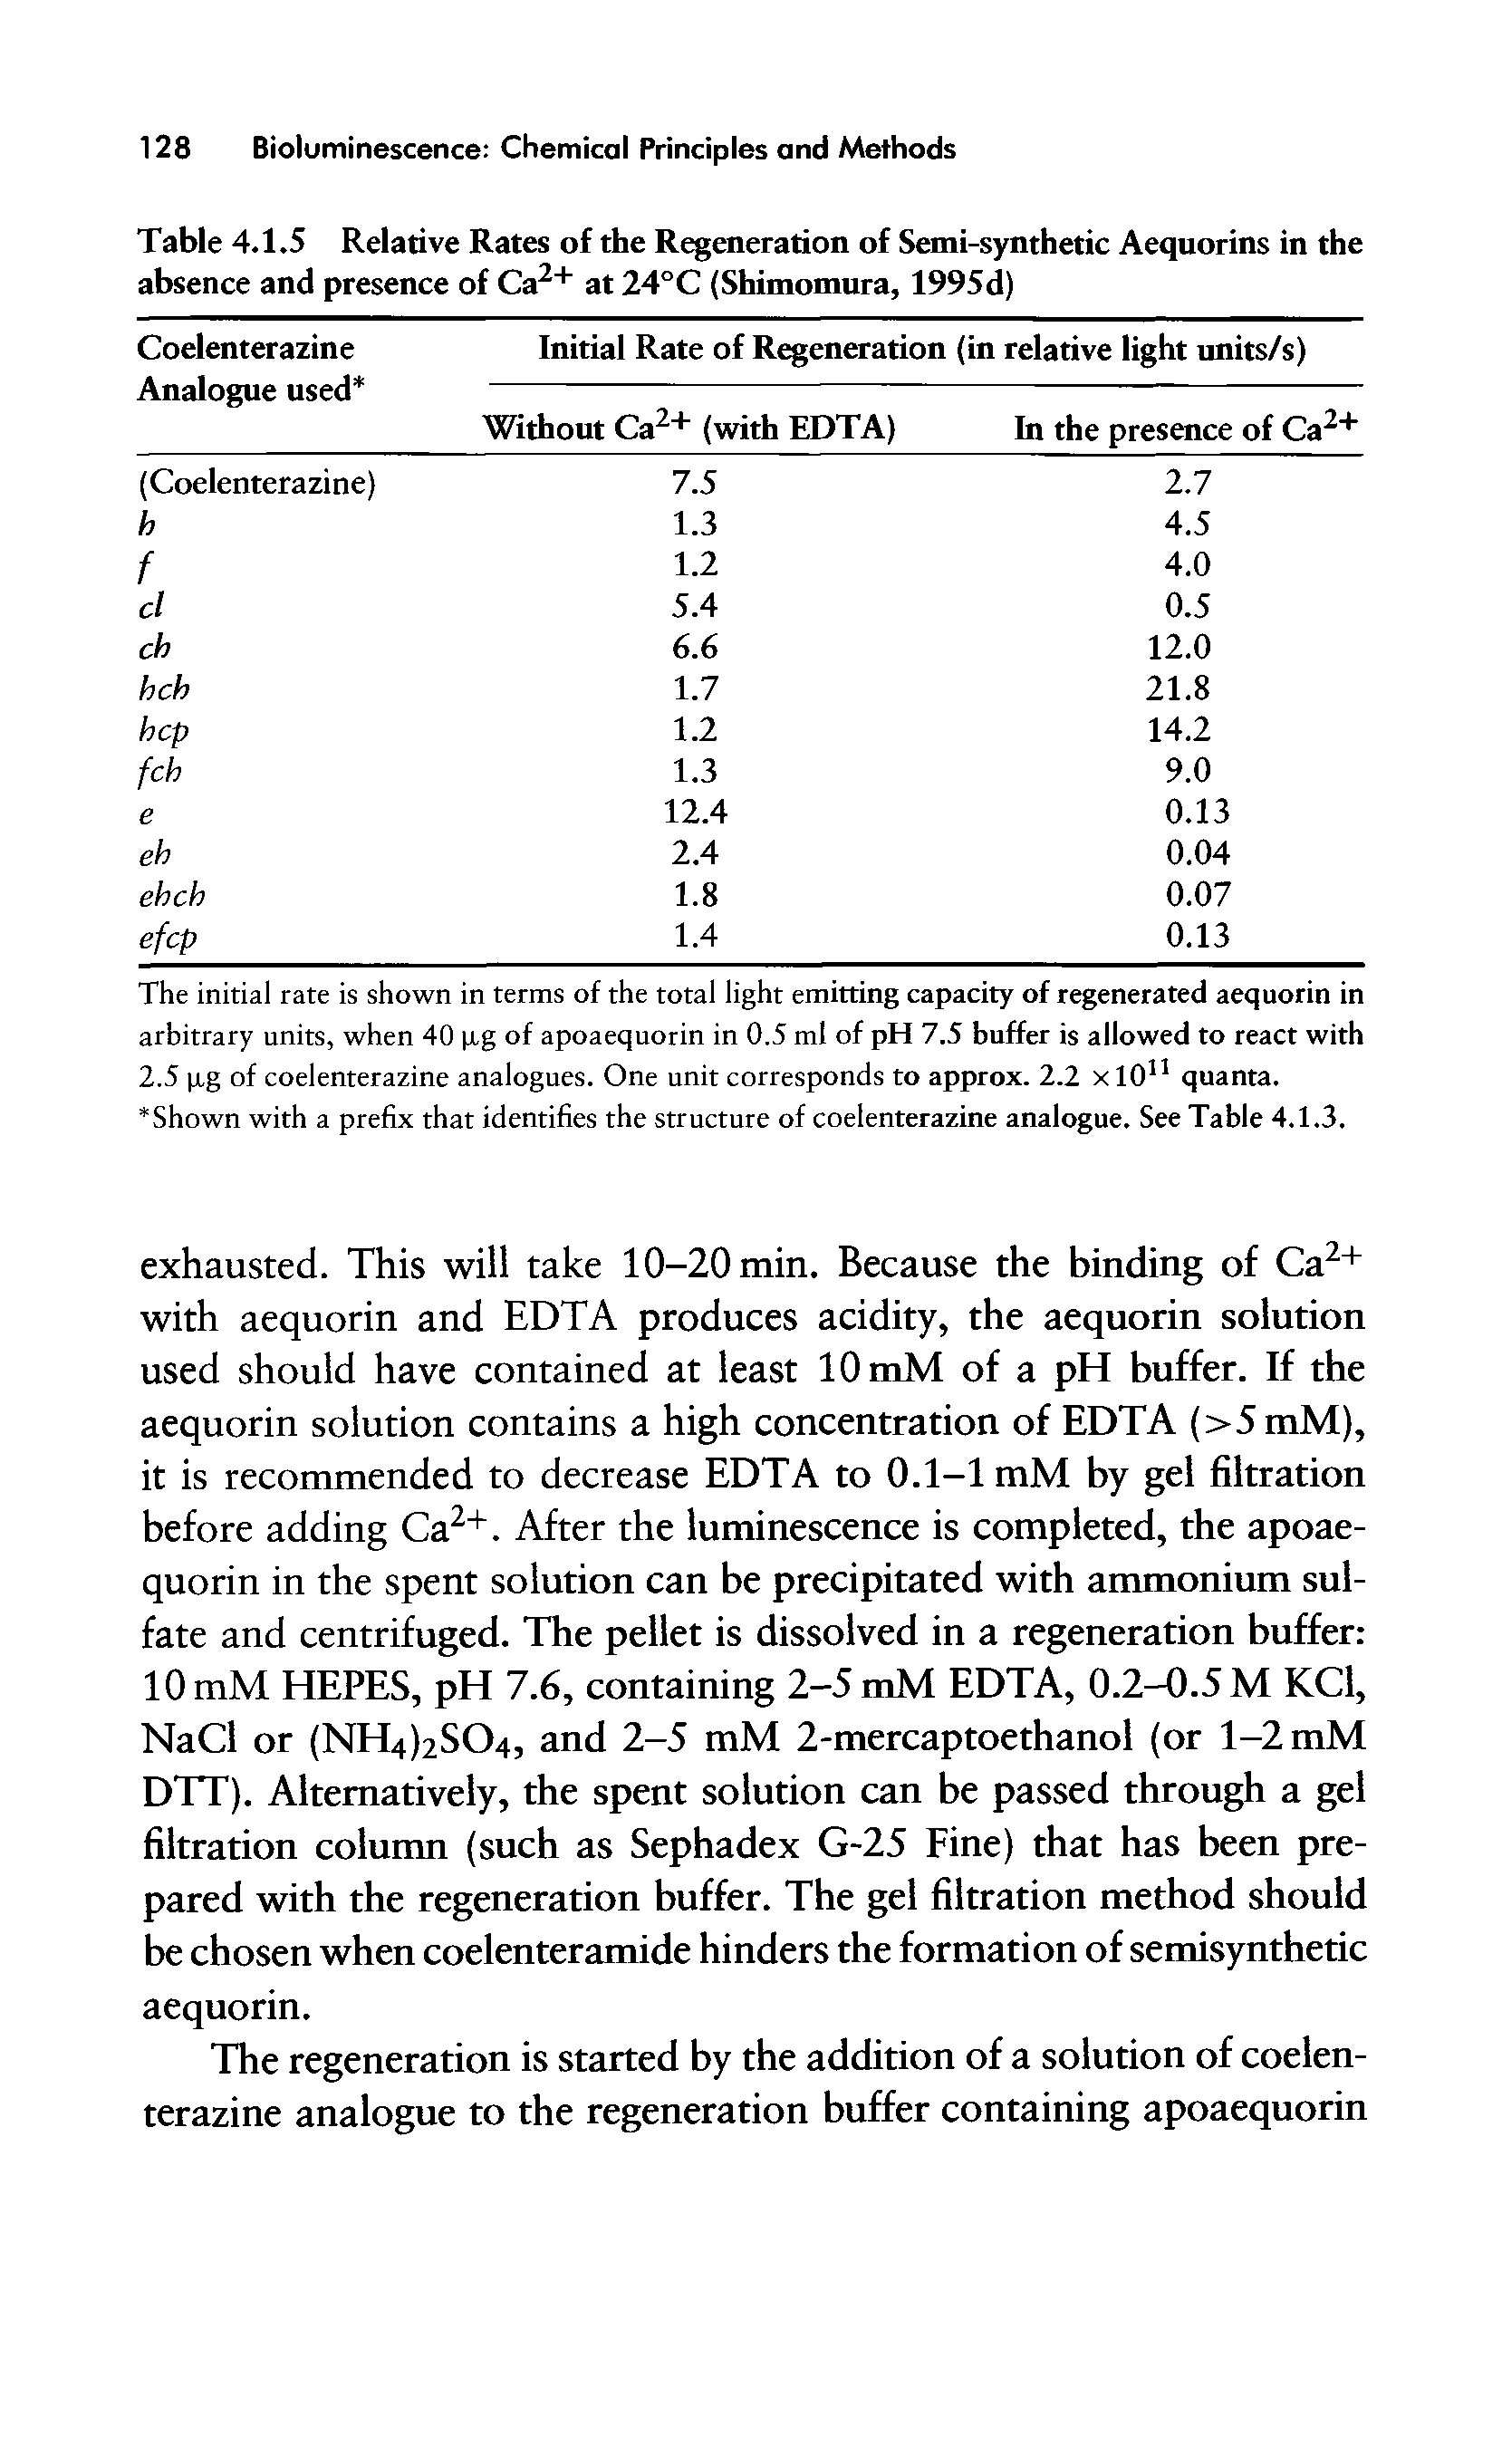 Table 4.1.5 Relative Rates of the Regeneration of Semi-synthetic Aequorins in the absence and presence of Ca2+ at 24°C (Shimomura, 1995d)...